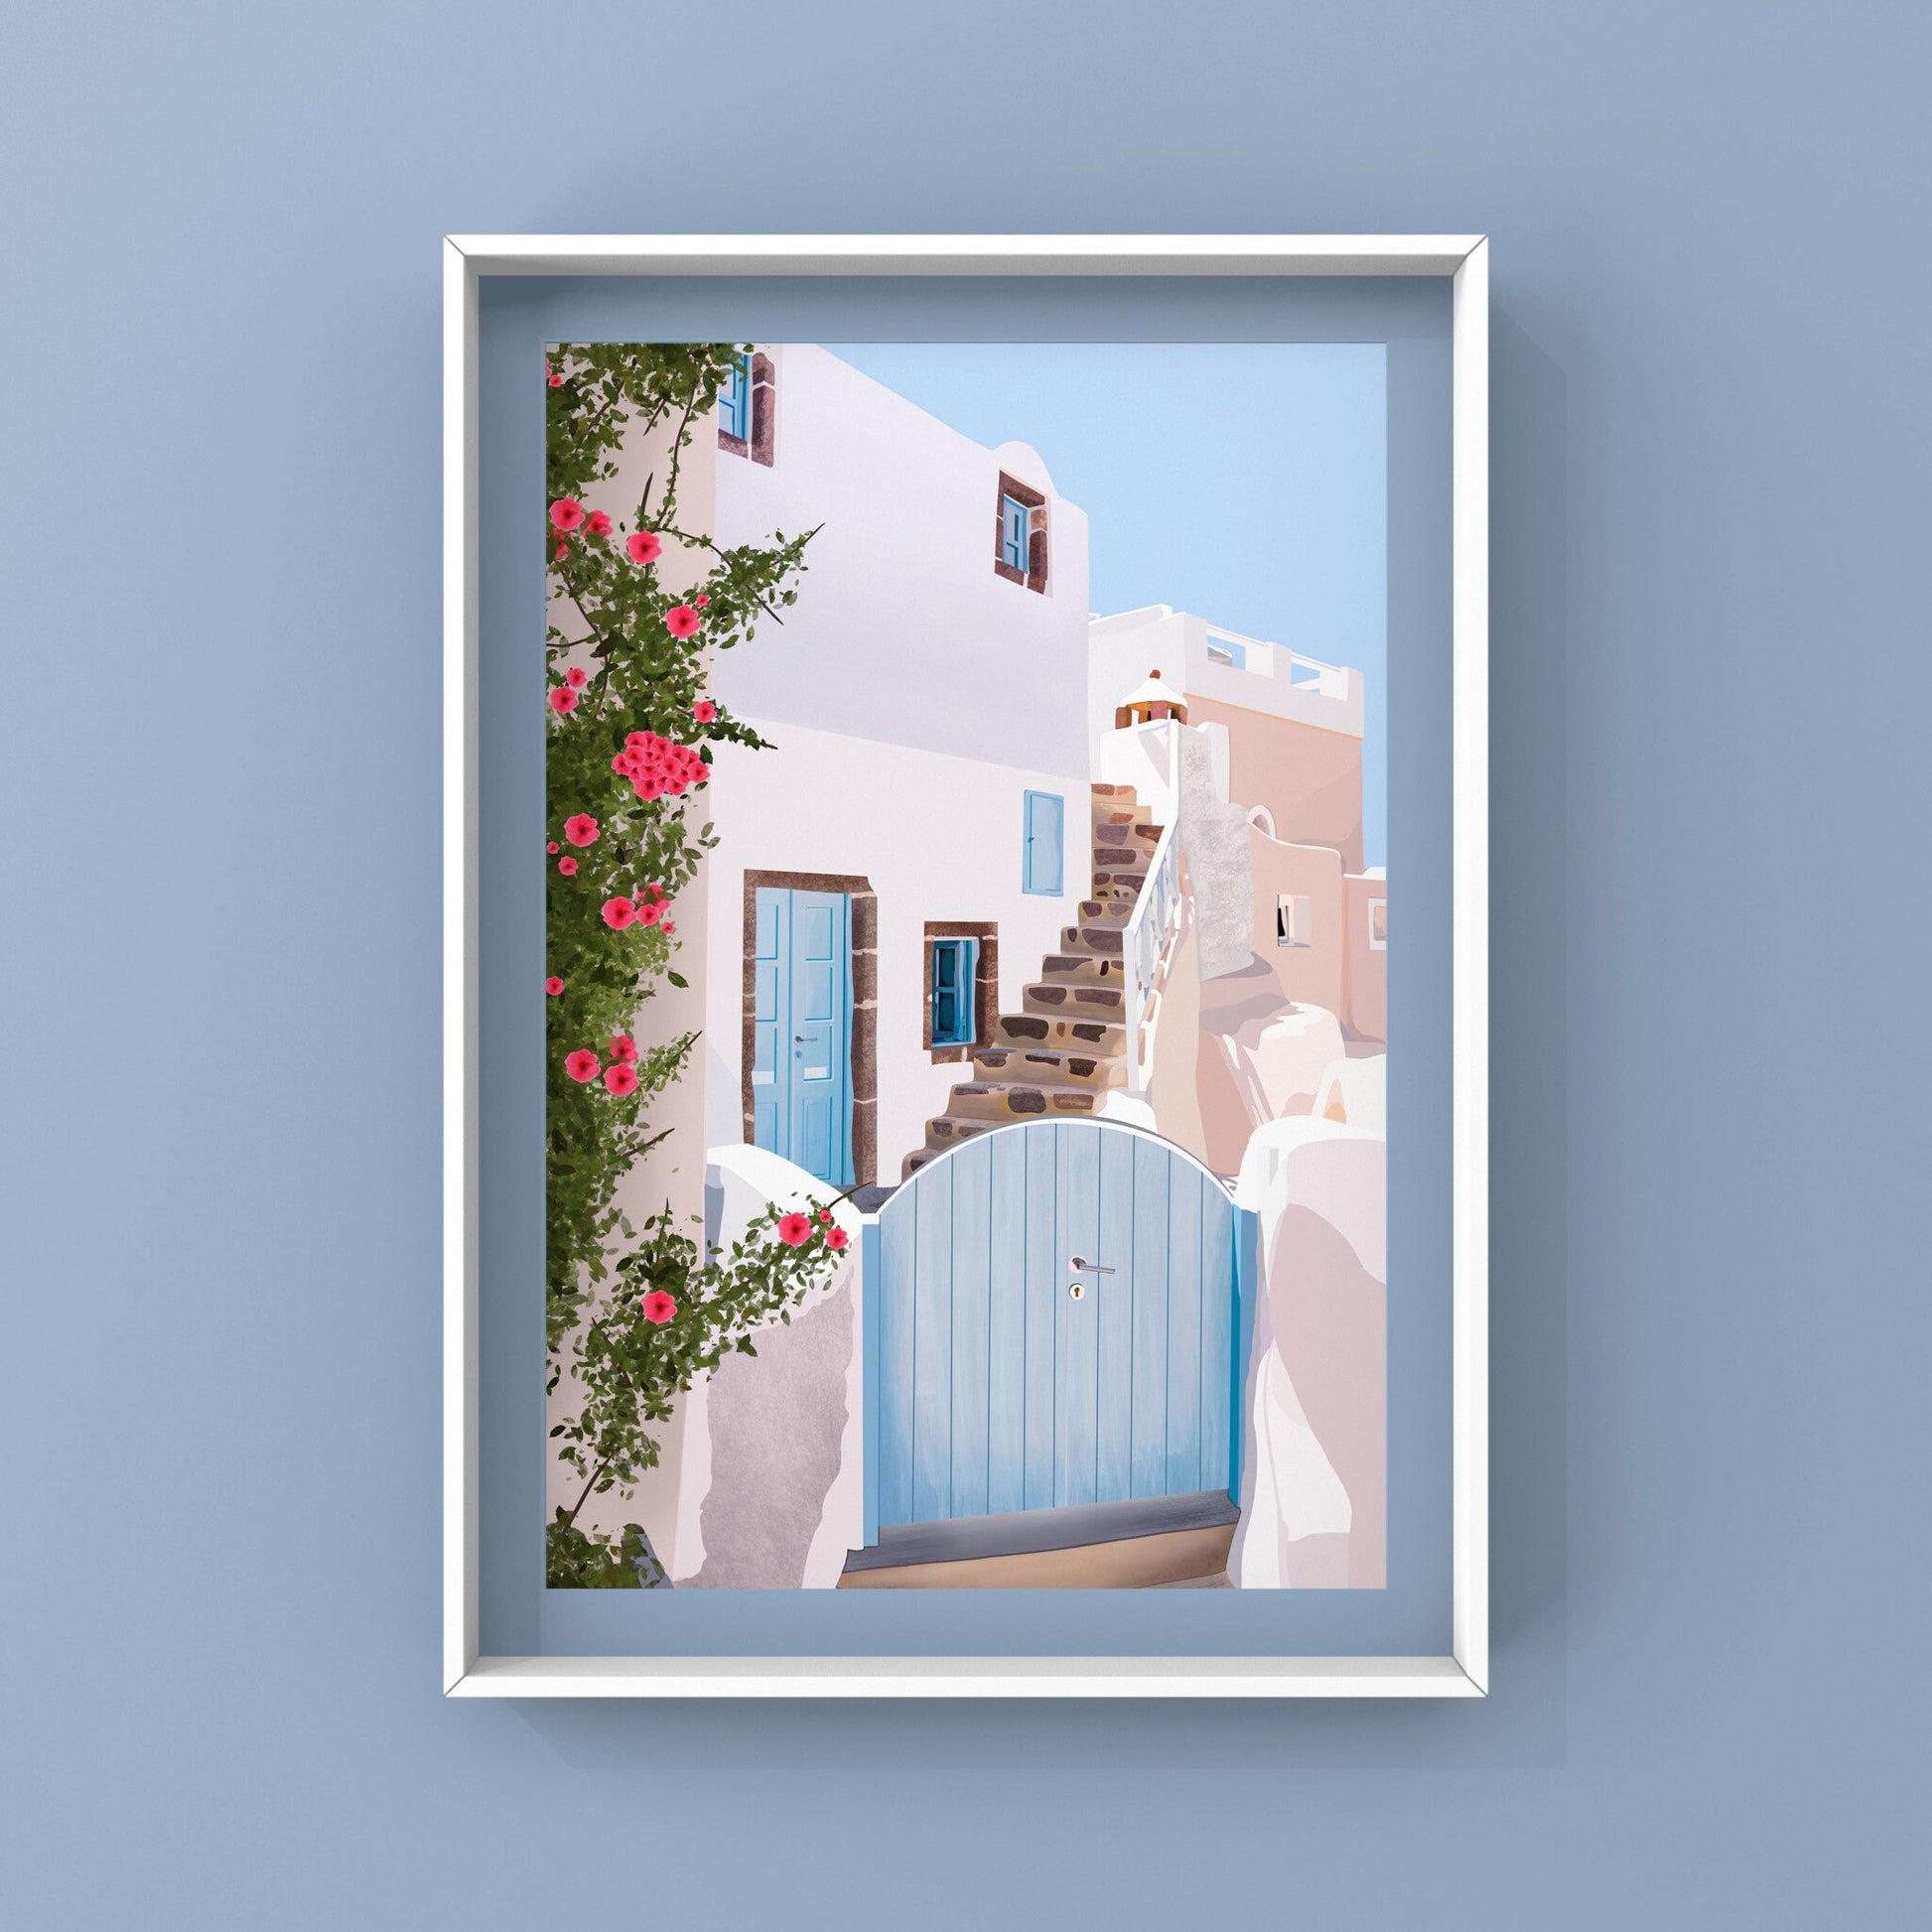 Greece cityscape art print - You can almost feel the warm breeze and the sun on your face when you see the beautiful and calming shades of white, blue, and neutrals/ beige with vibrant green leaves/vines and bright pink/fascia flowers. It will make you feel like you're in santorini or mykonos in greece!